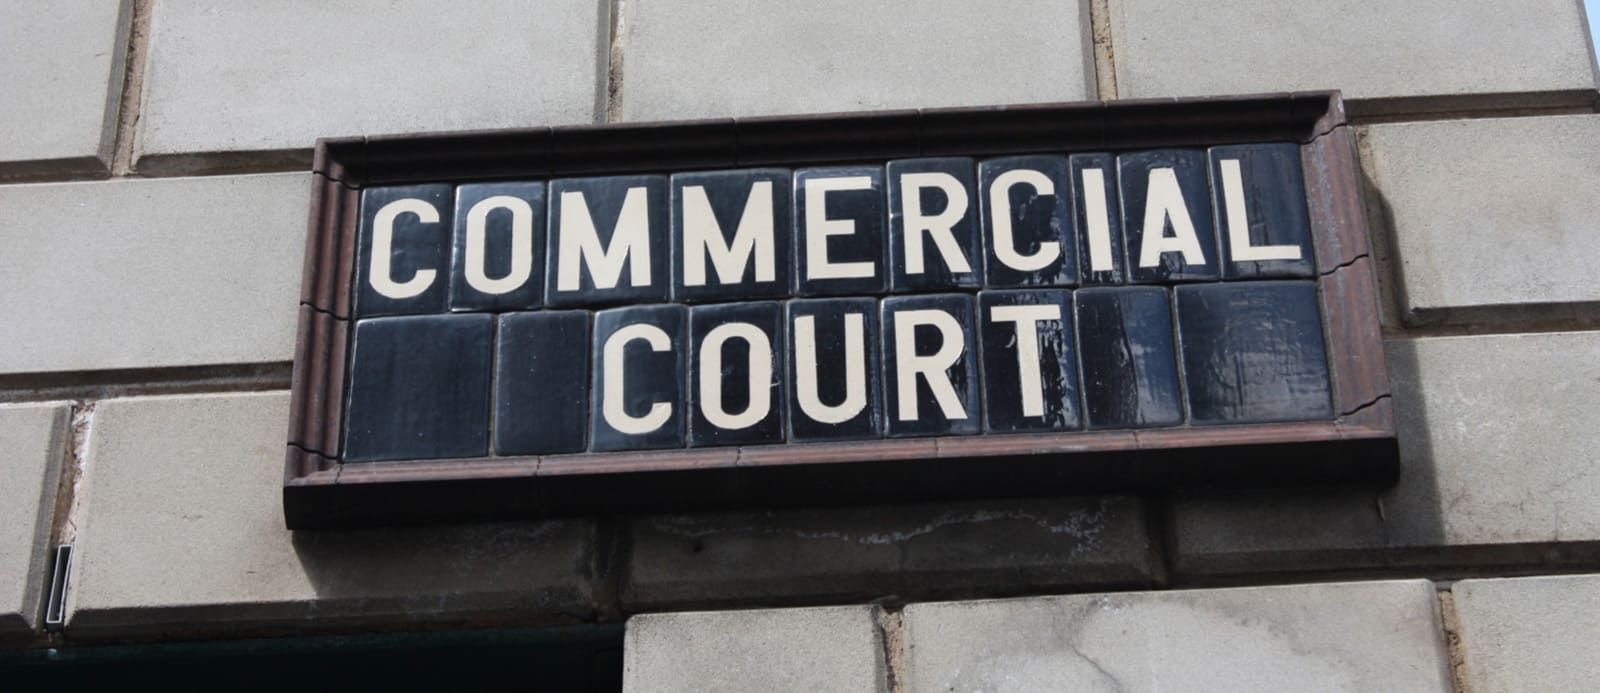 Brief overview of the Commercial Courts Act 2015